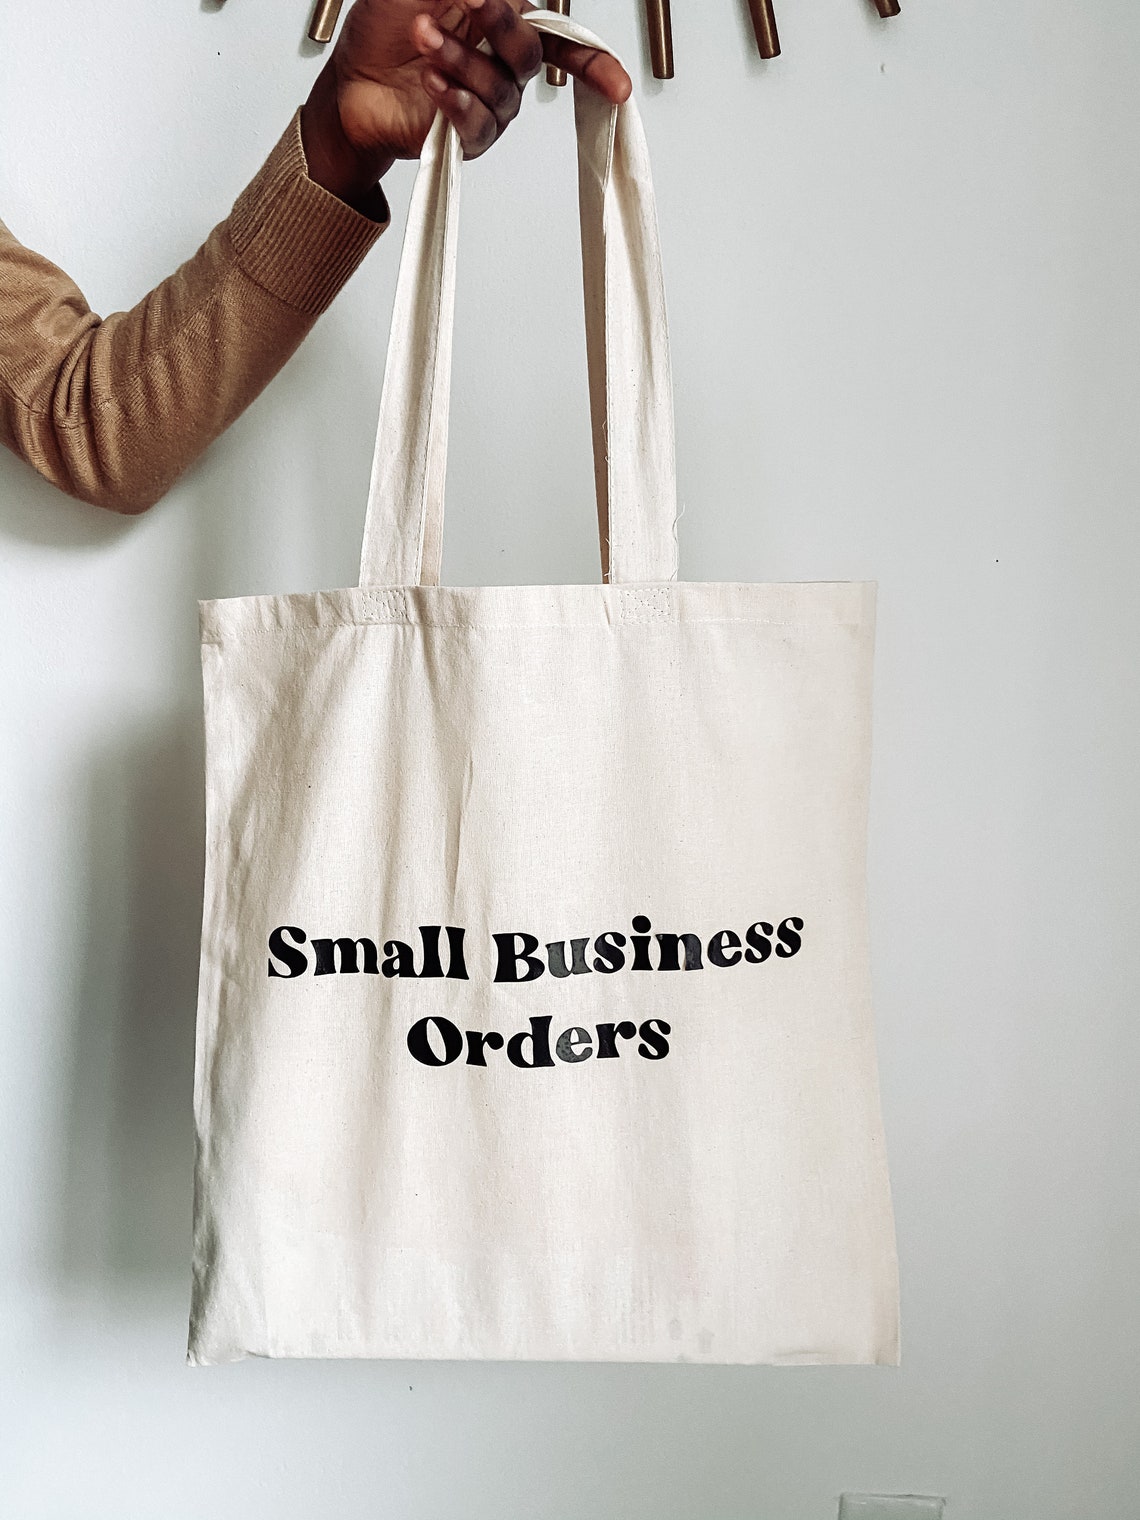 Small Business Orders Tote Bag Reusable Tote Bags Christian - Etsy